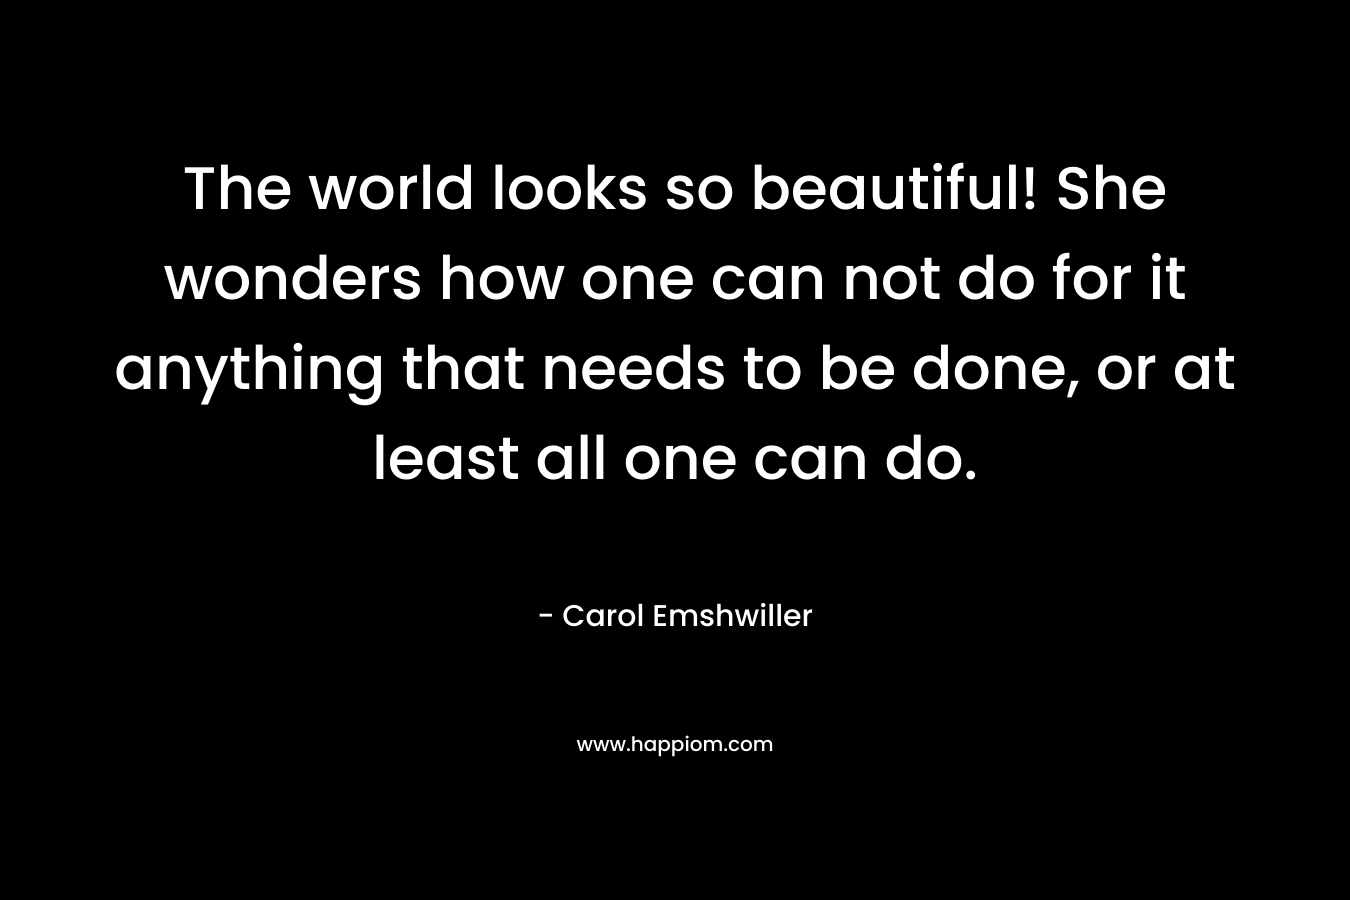 The world looks so beautiful! She wonders how one can not do for it anything that needs to be done, or at least all one can do. – Carol Emshwiller